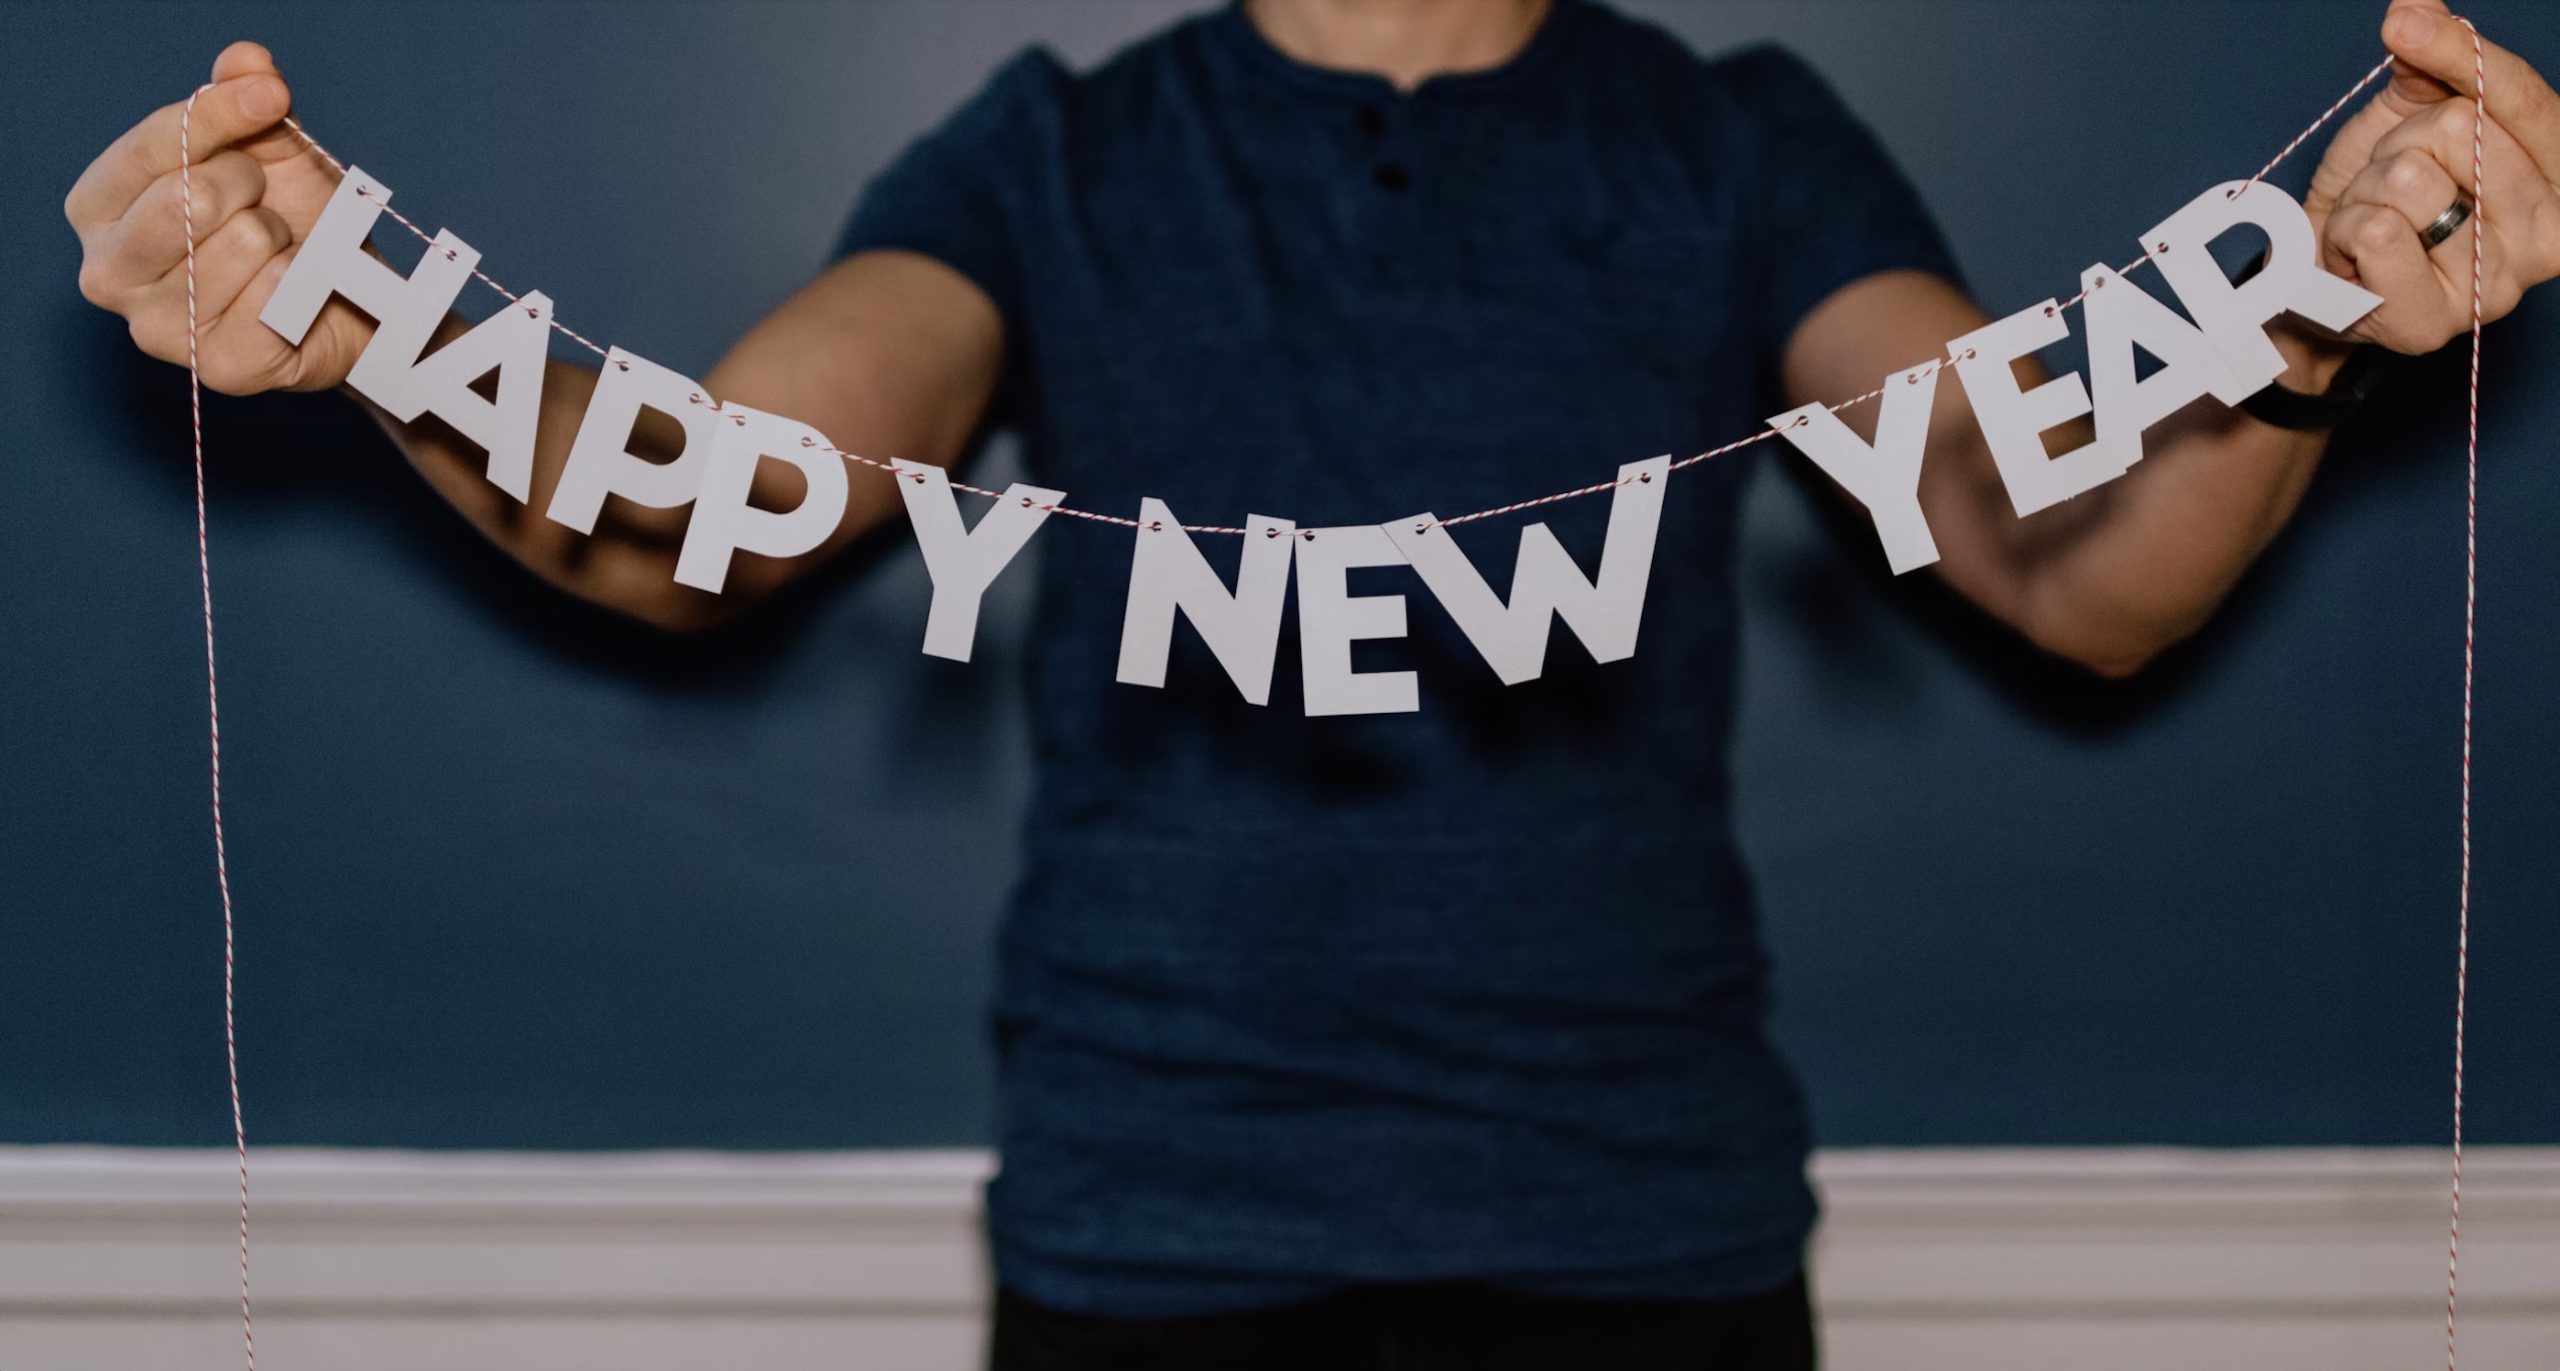 10 Healthy New Year’s Resolutions You Can Keep